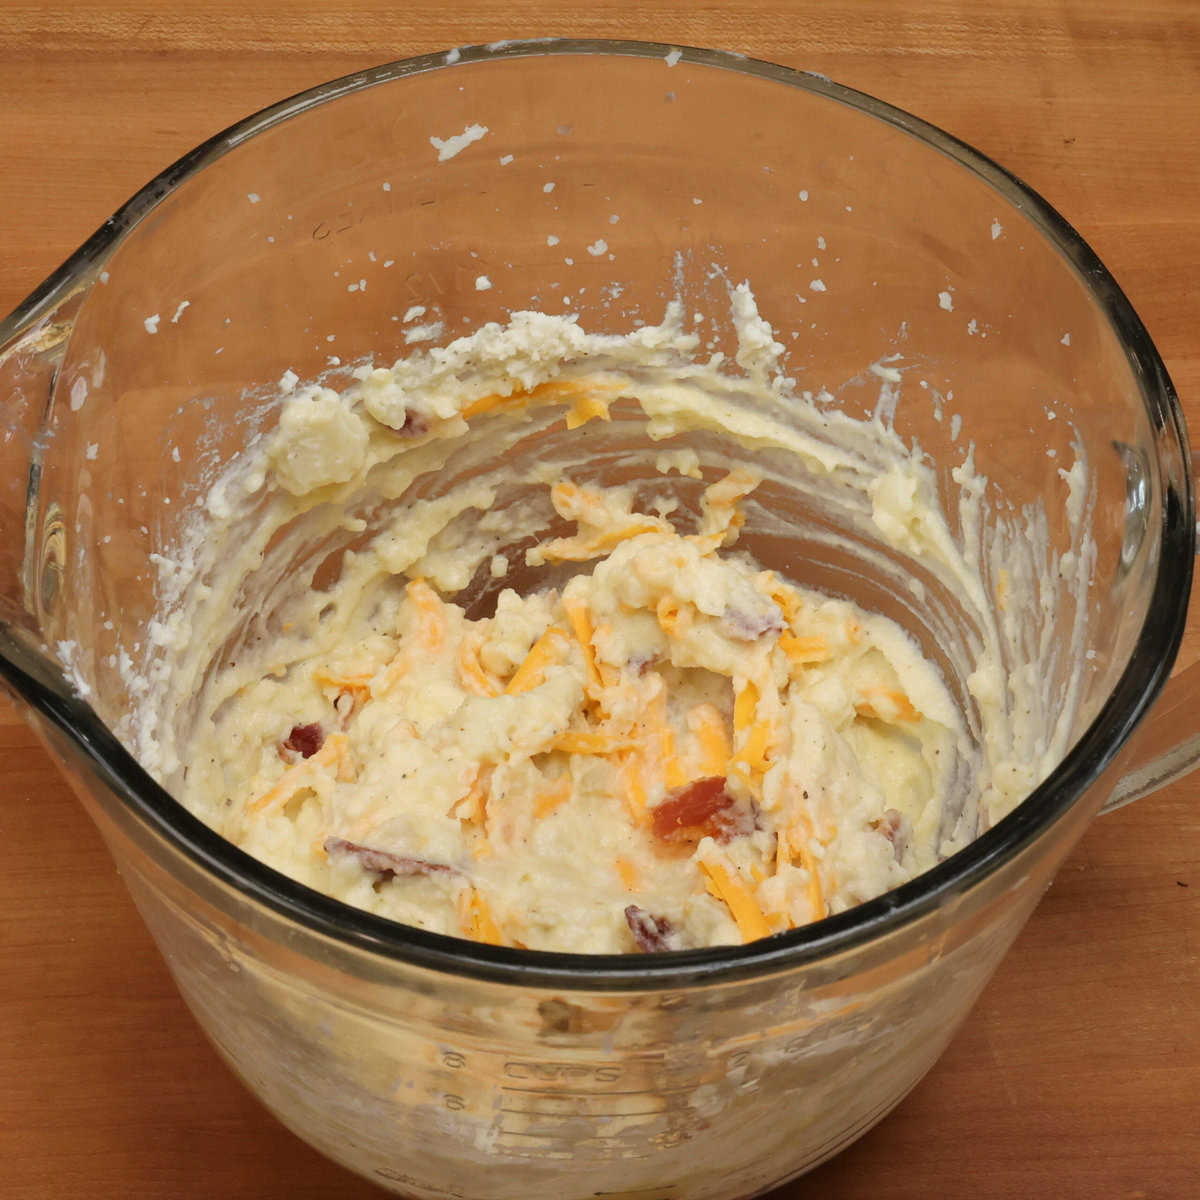 twice baked potato casserole filling in a mixing bowl.